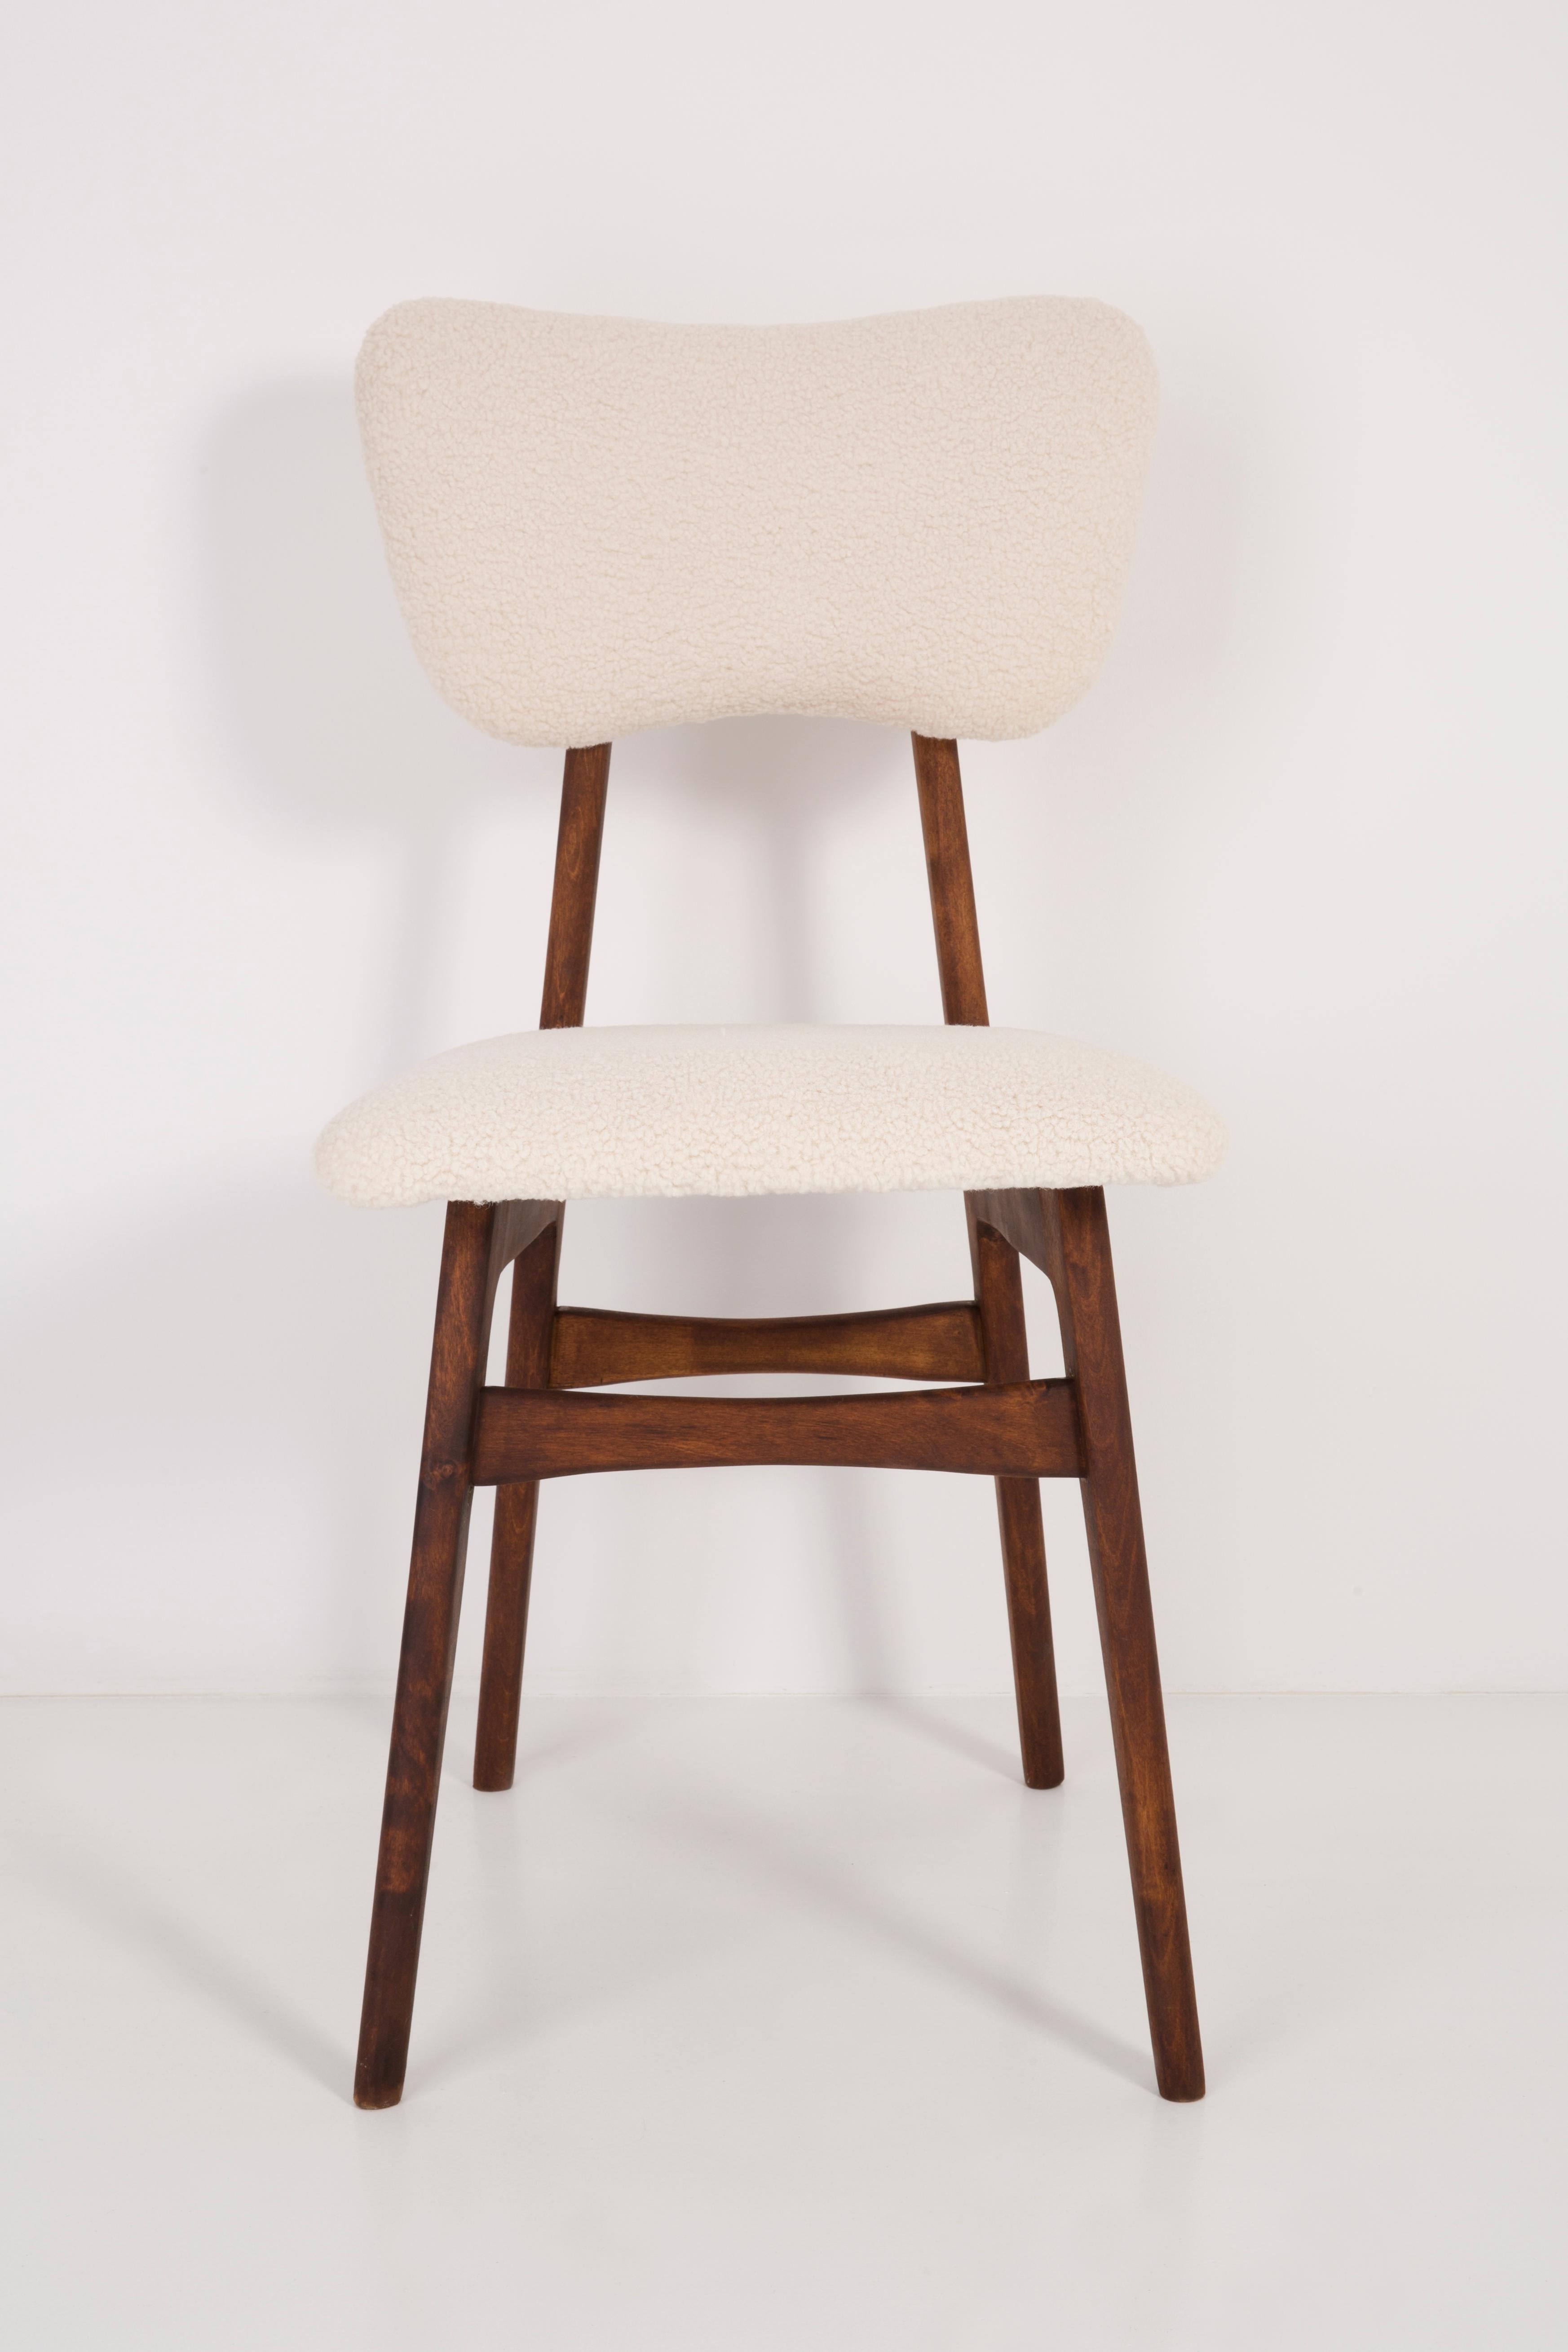 Set of Six 20th Century Light Crème Boucle Chairs, 1960s For Sale 4